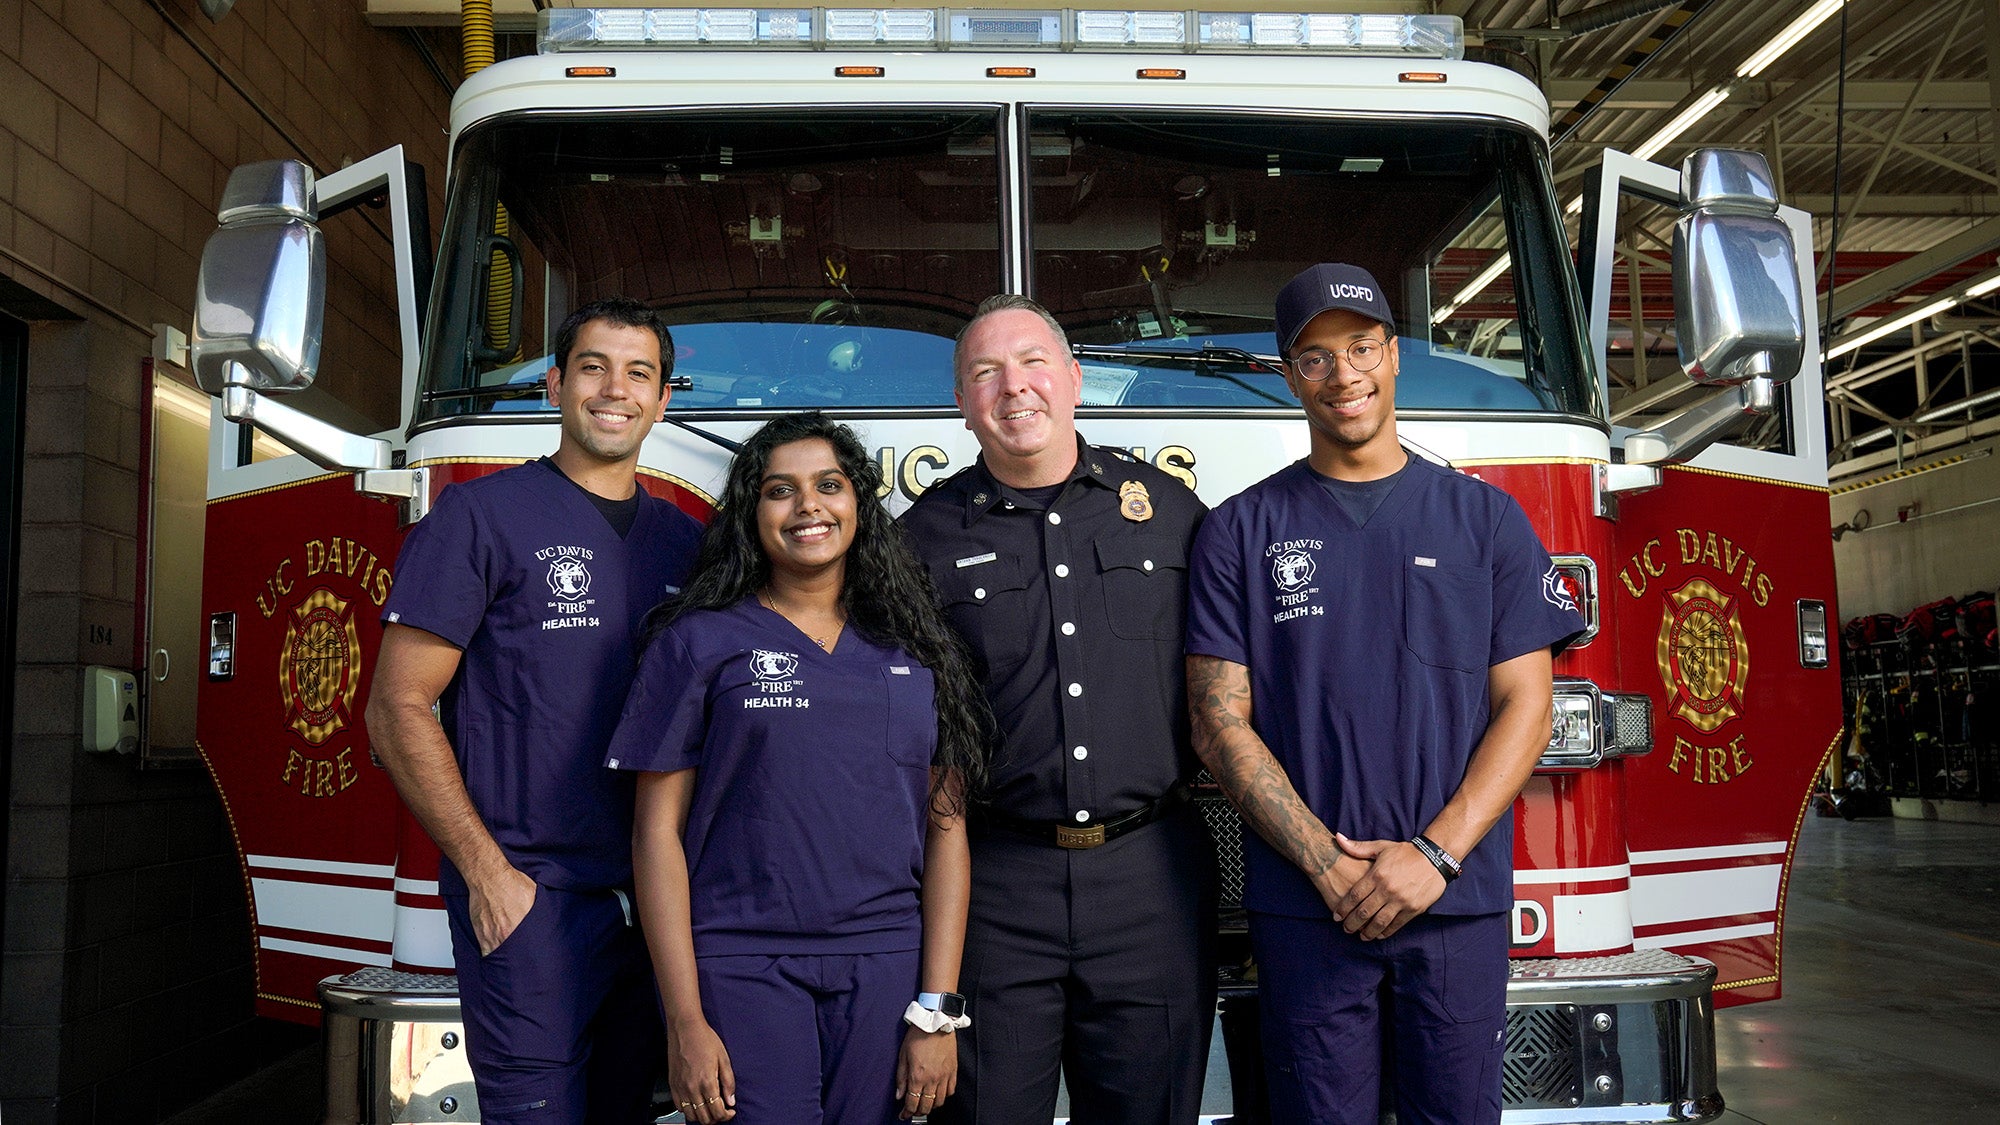 Student EMTs and fire chief pose for photo in front of fire truck.